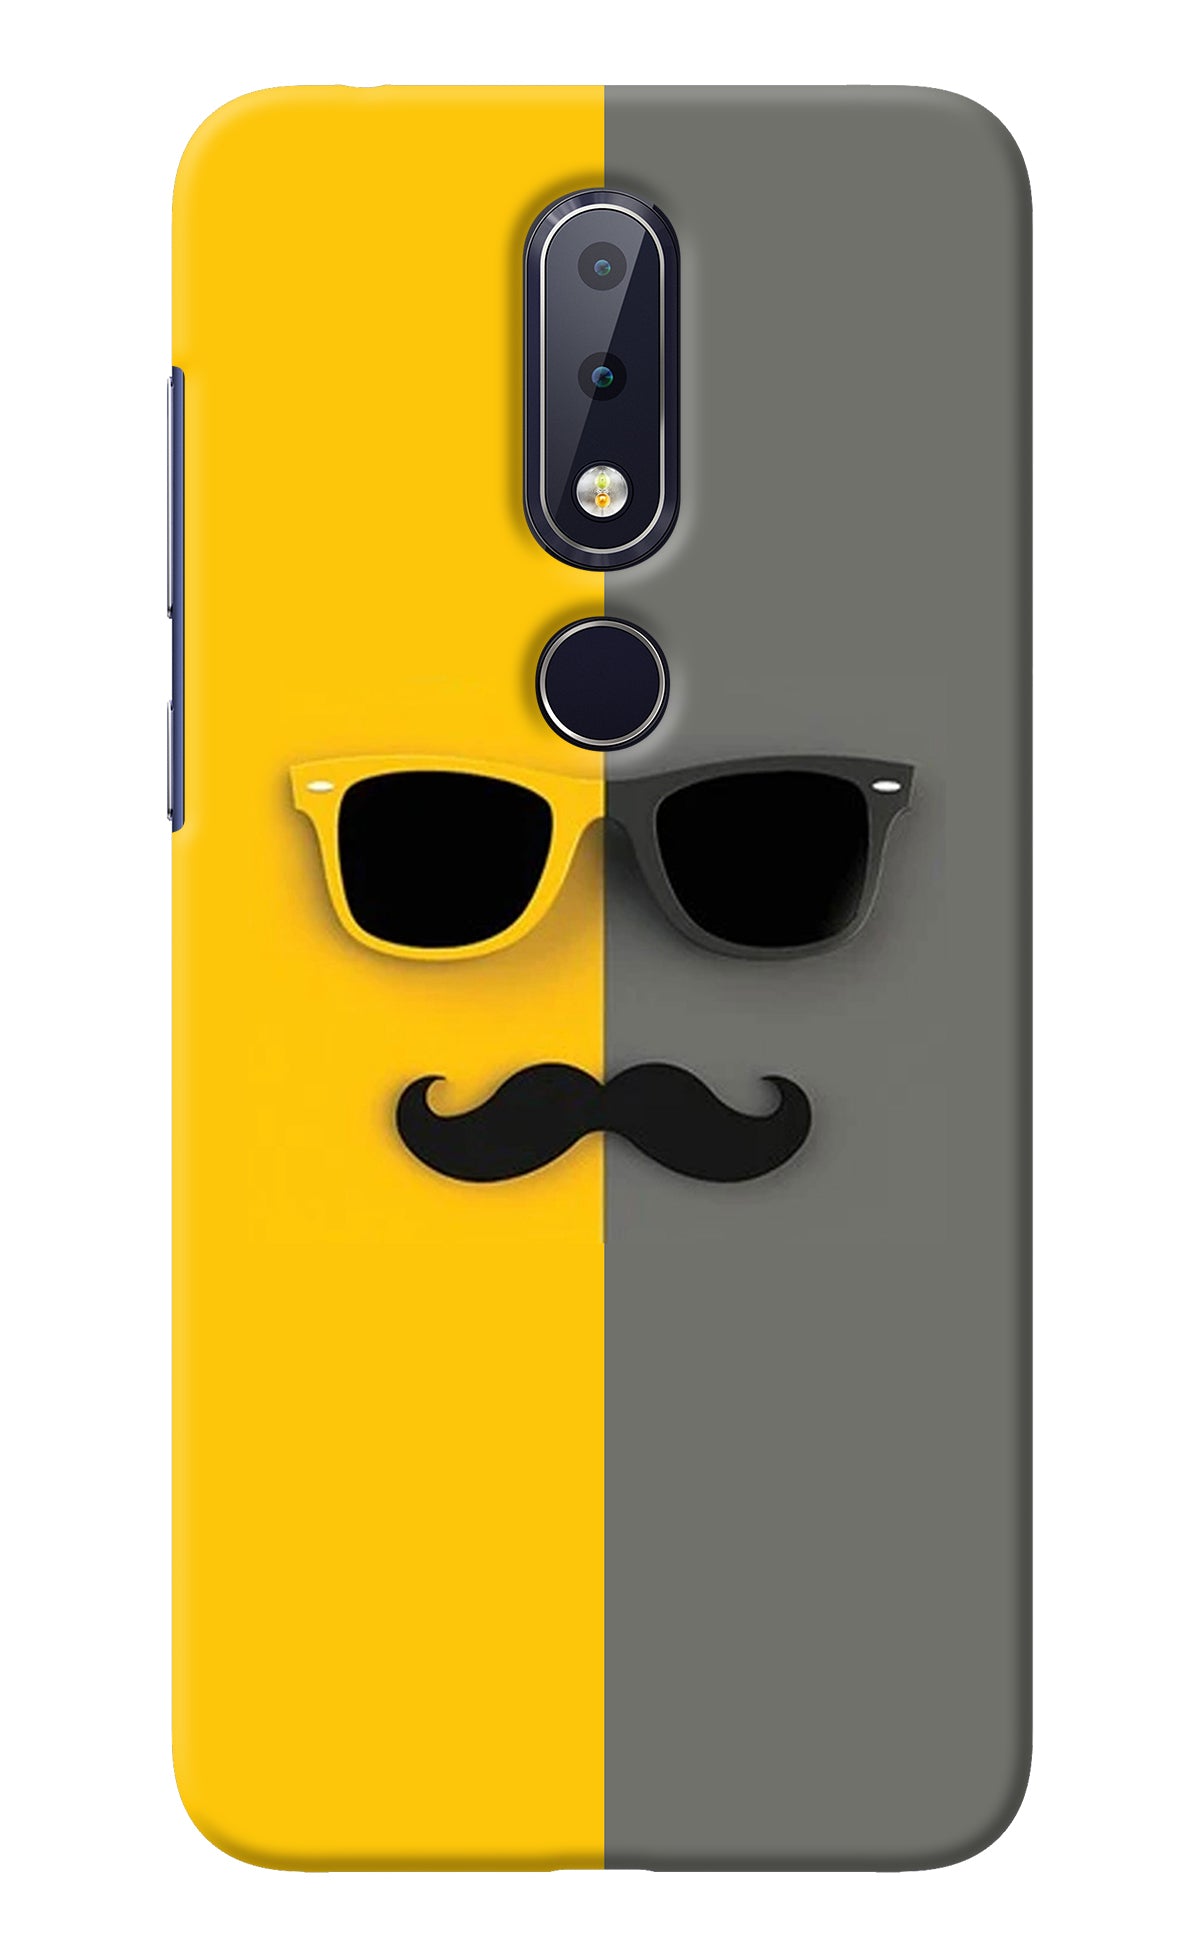 Sunglasses with Mustache Nokia 6.1 plus Back Cover